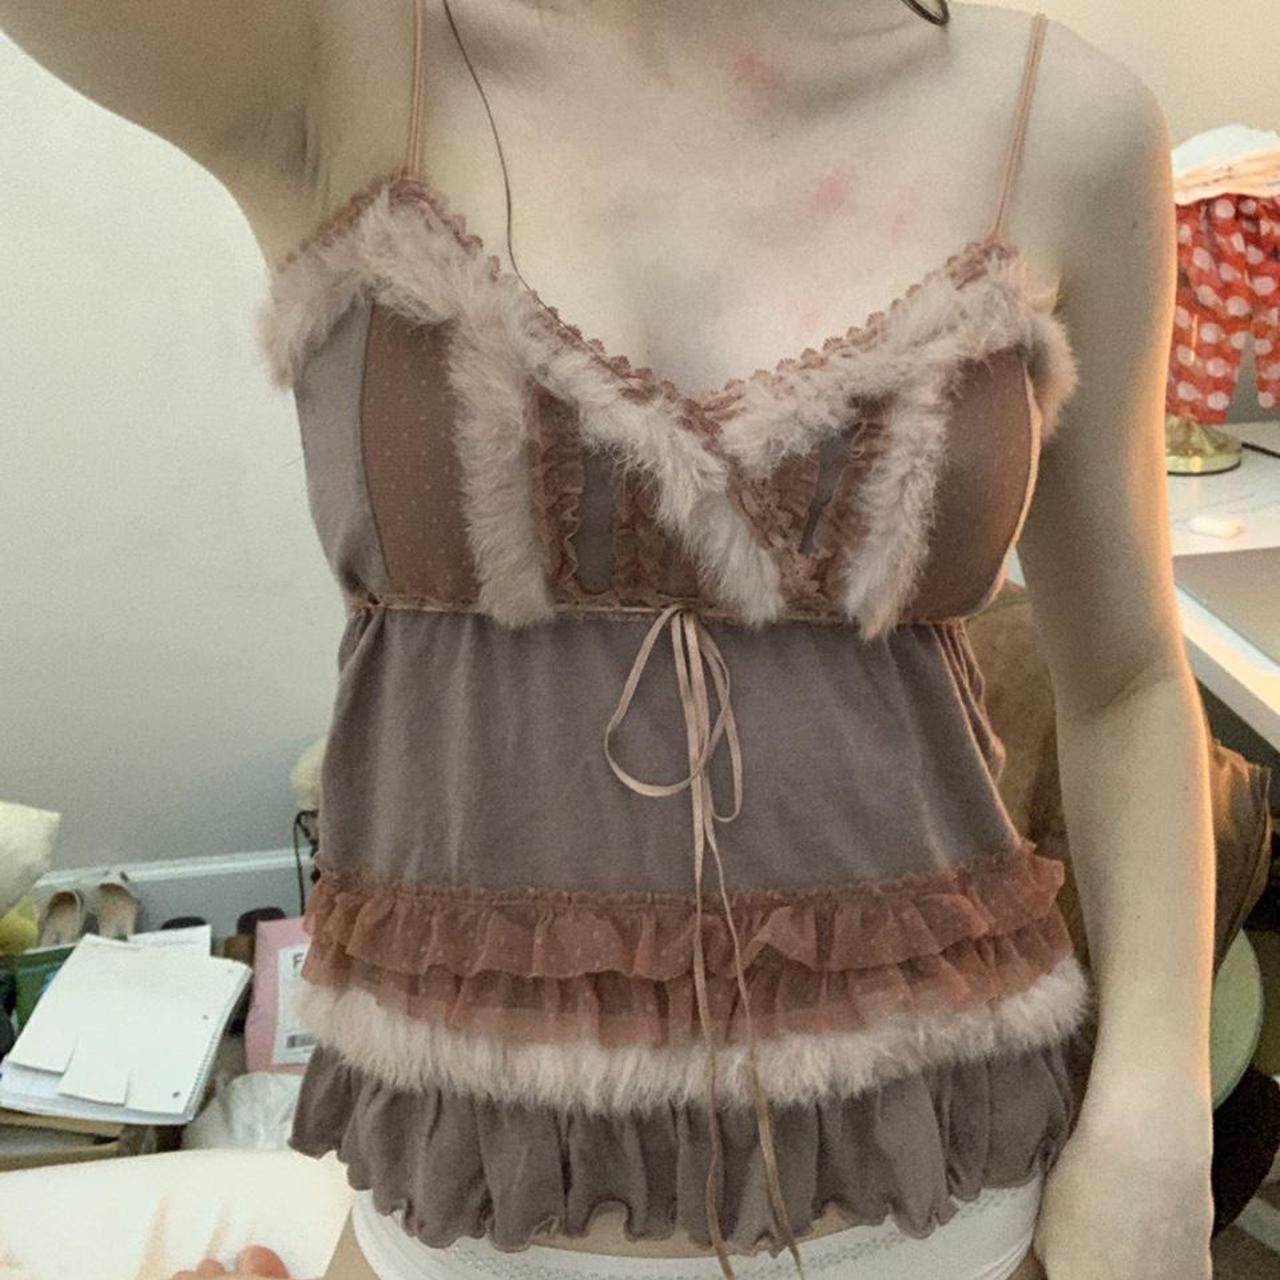 Flowy Pleated Babydoll Top With Lace by Victoria - Depop